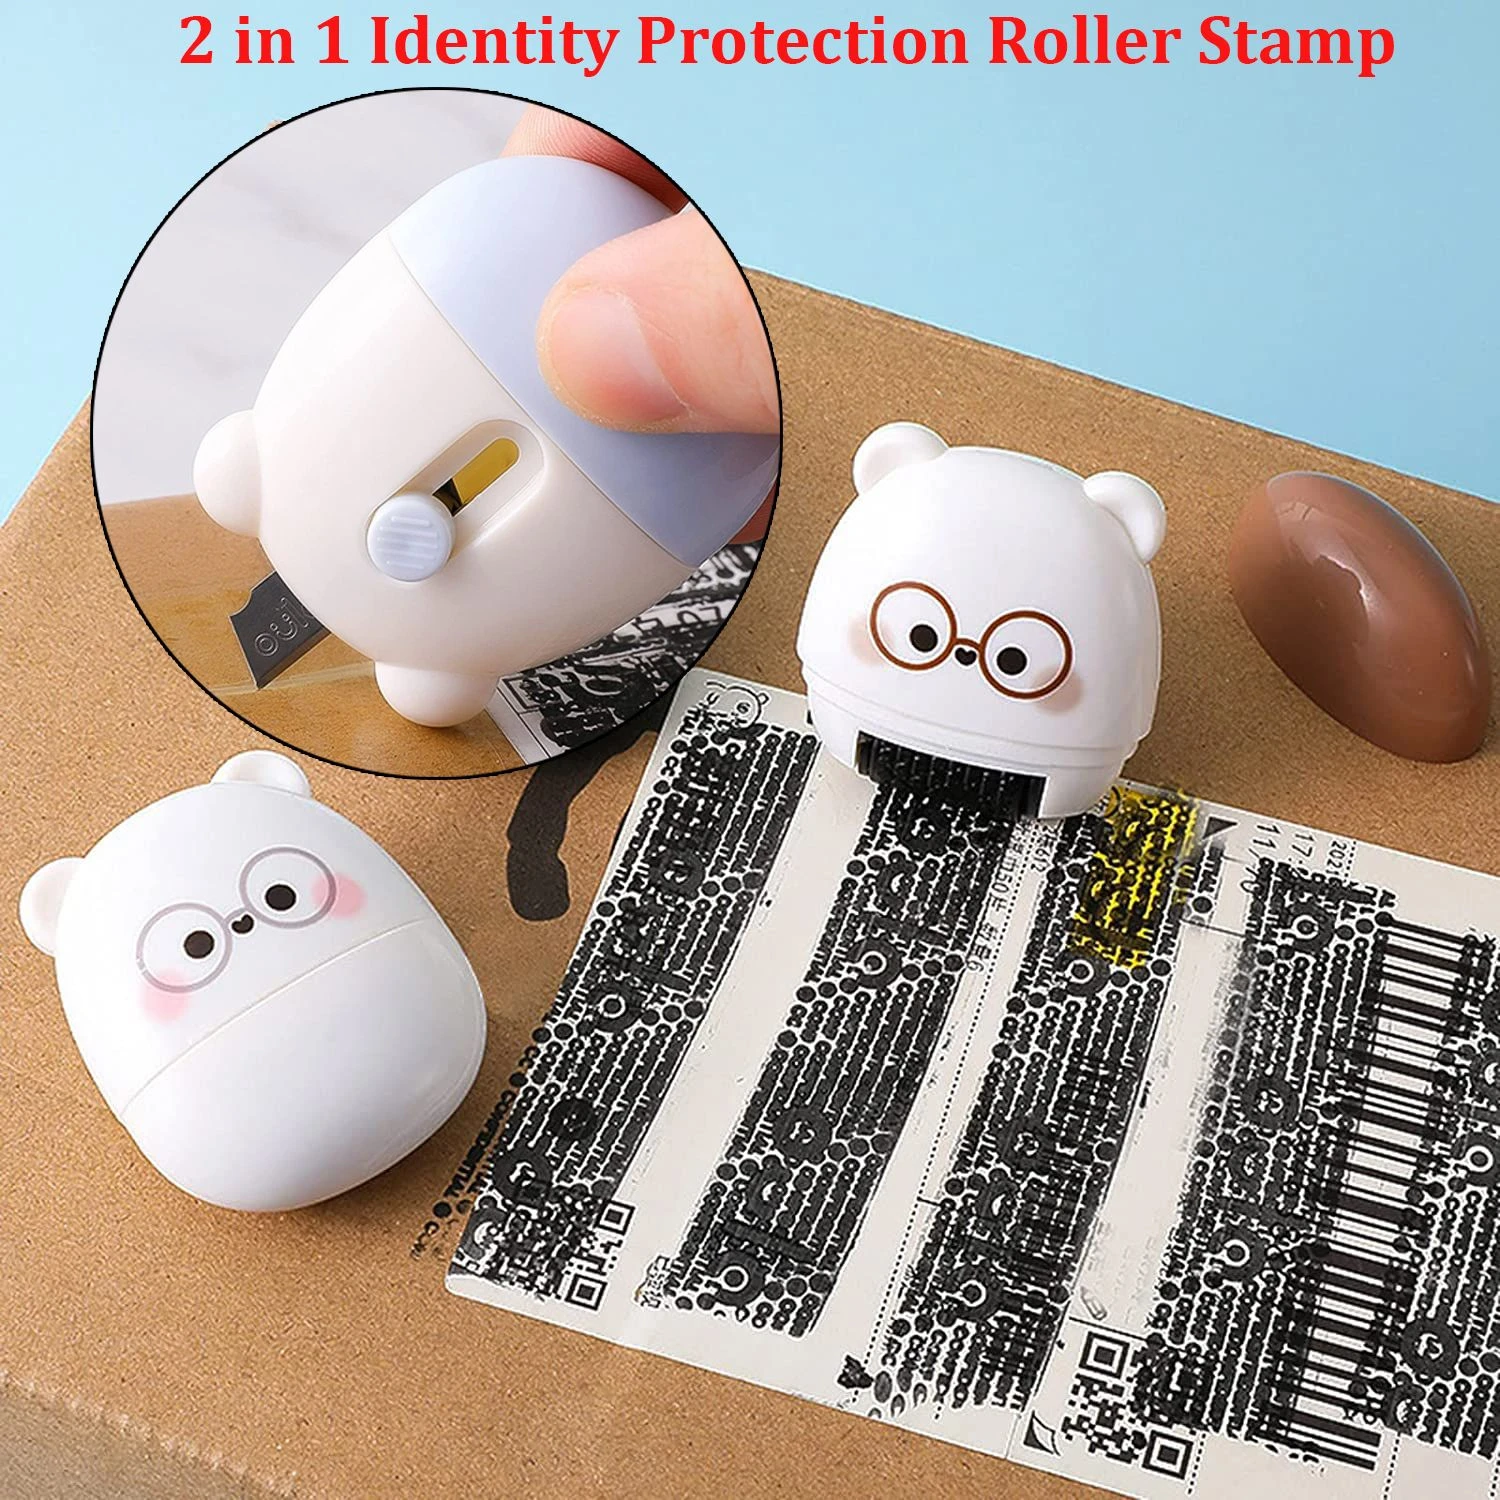 Privacy Blackout Mini Messy Code Identity Cover Eliminator Identity Protection Roller Stamp Guard Seal Information vintage wooden rubber stamps